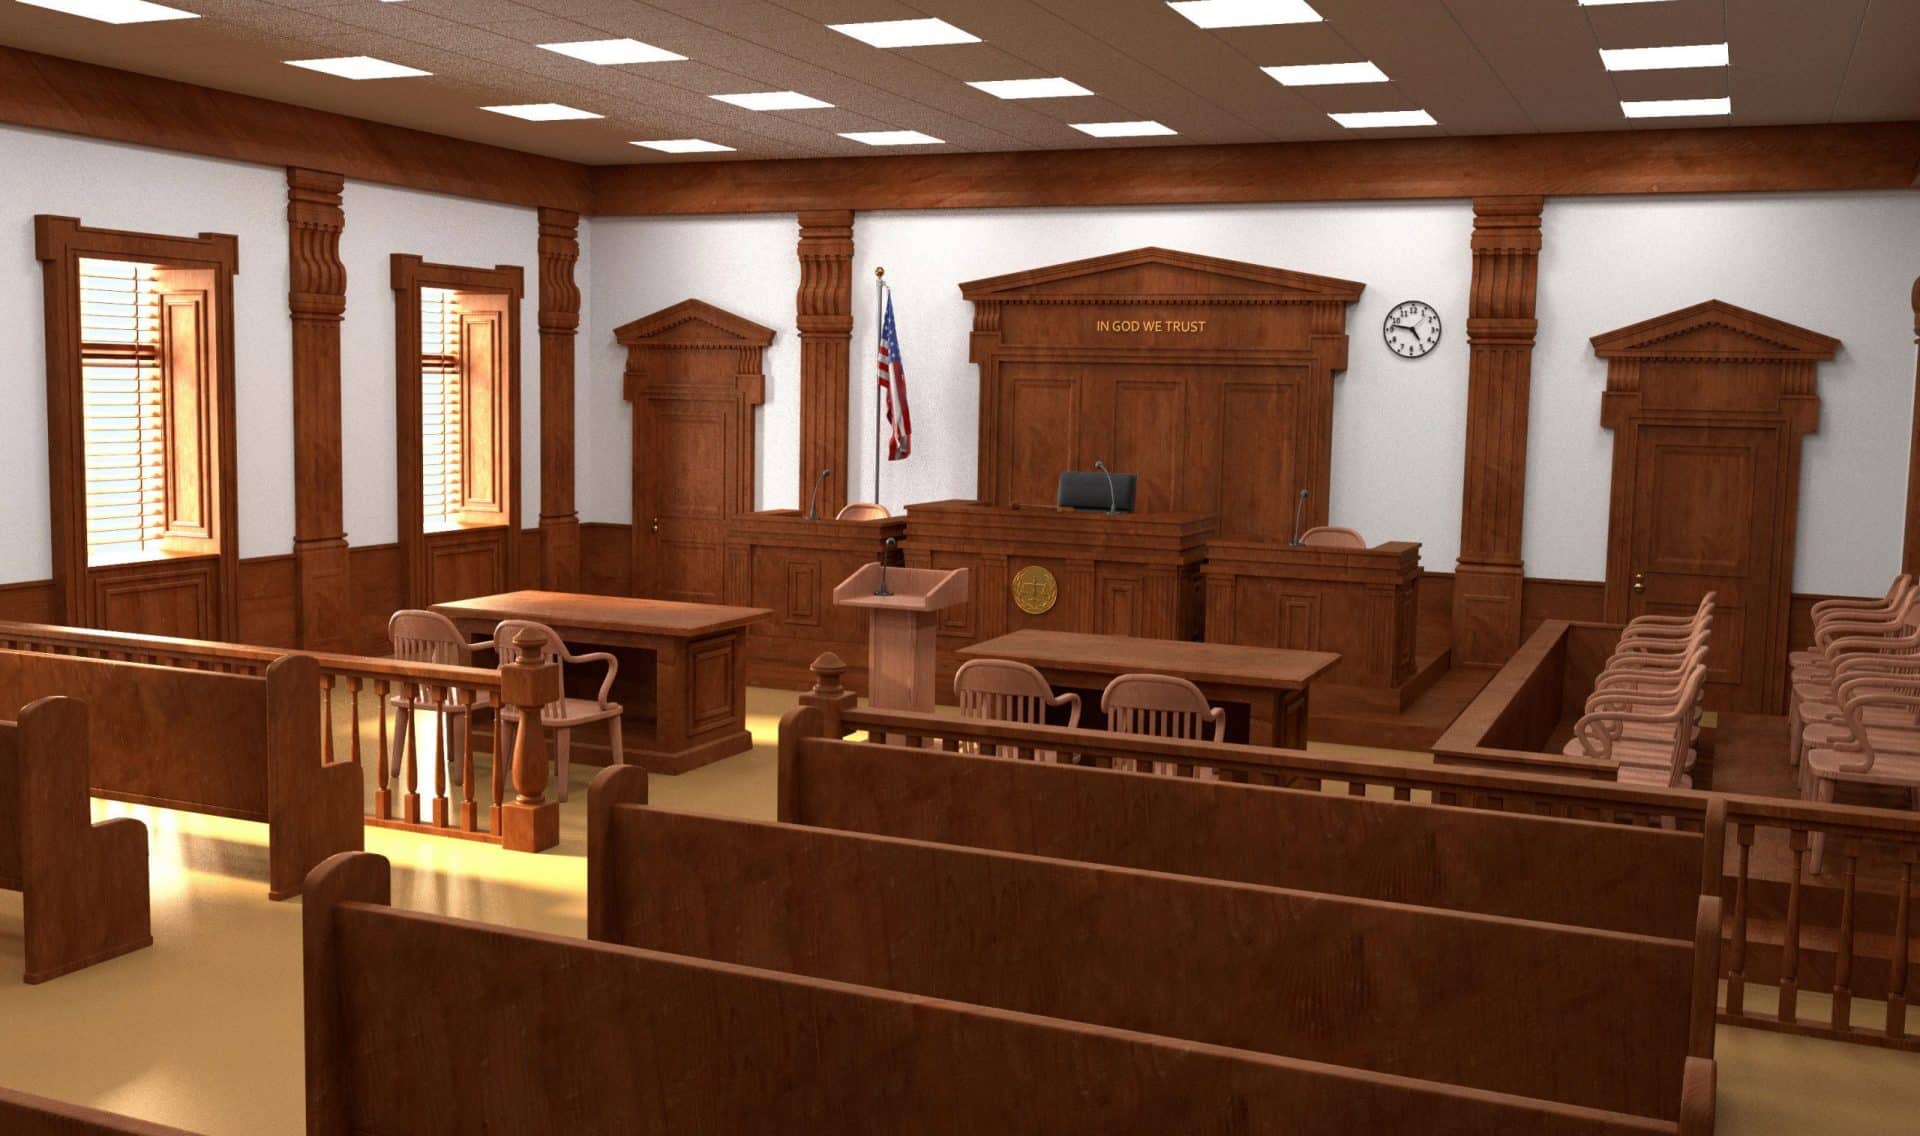 A typical Courtroom